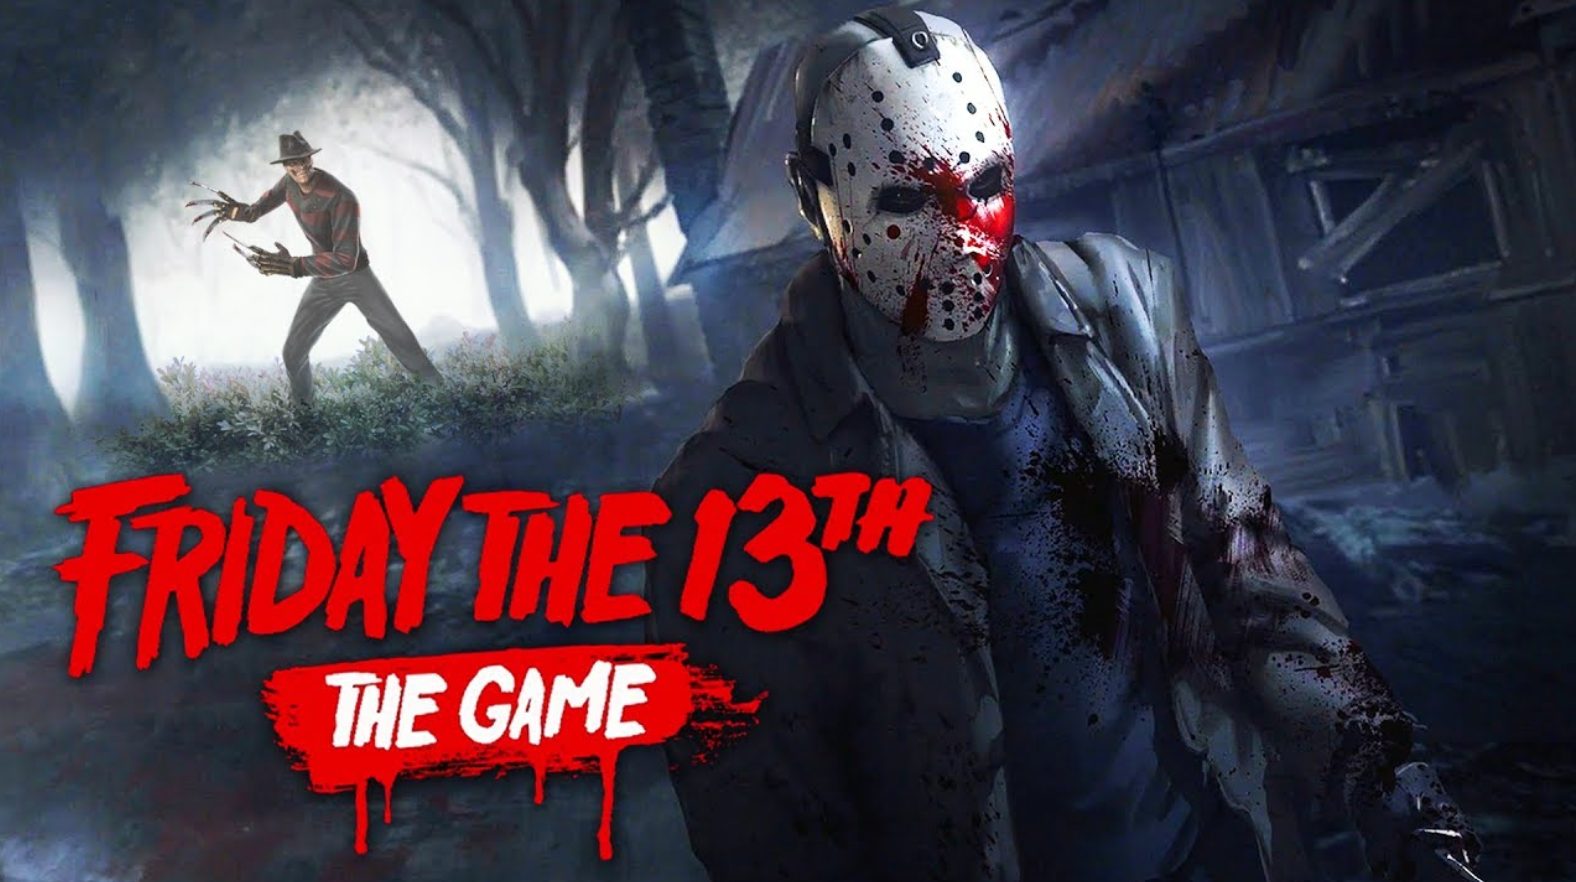 Friday the 13th The Game Nintendo Switch Version Full Game Setup Free Download